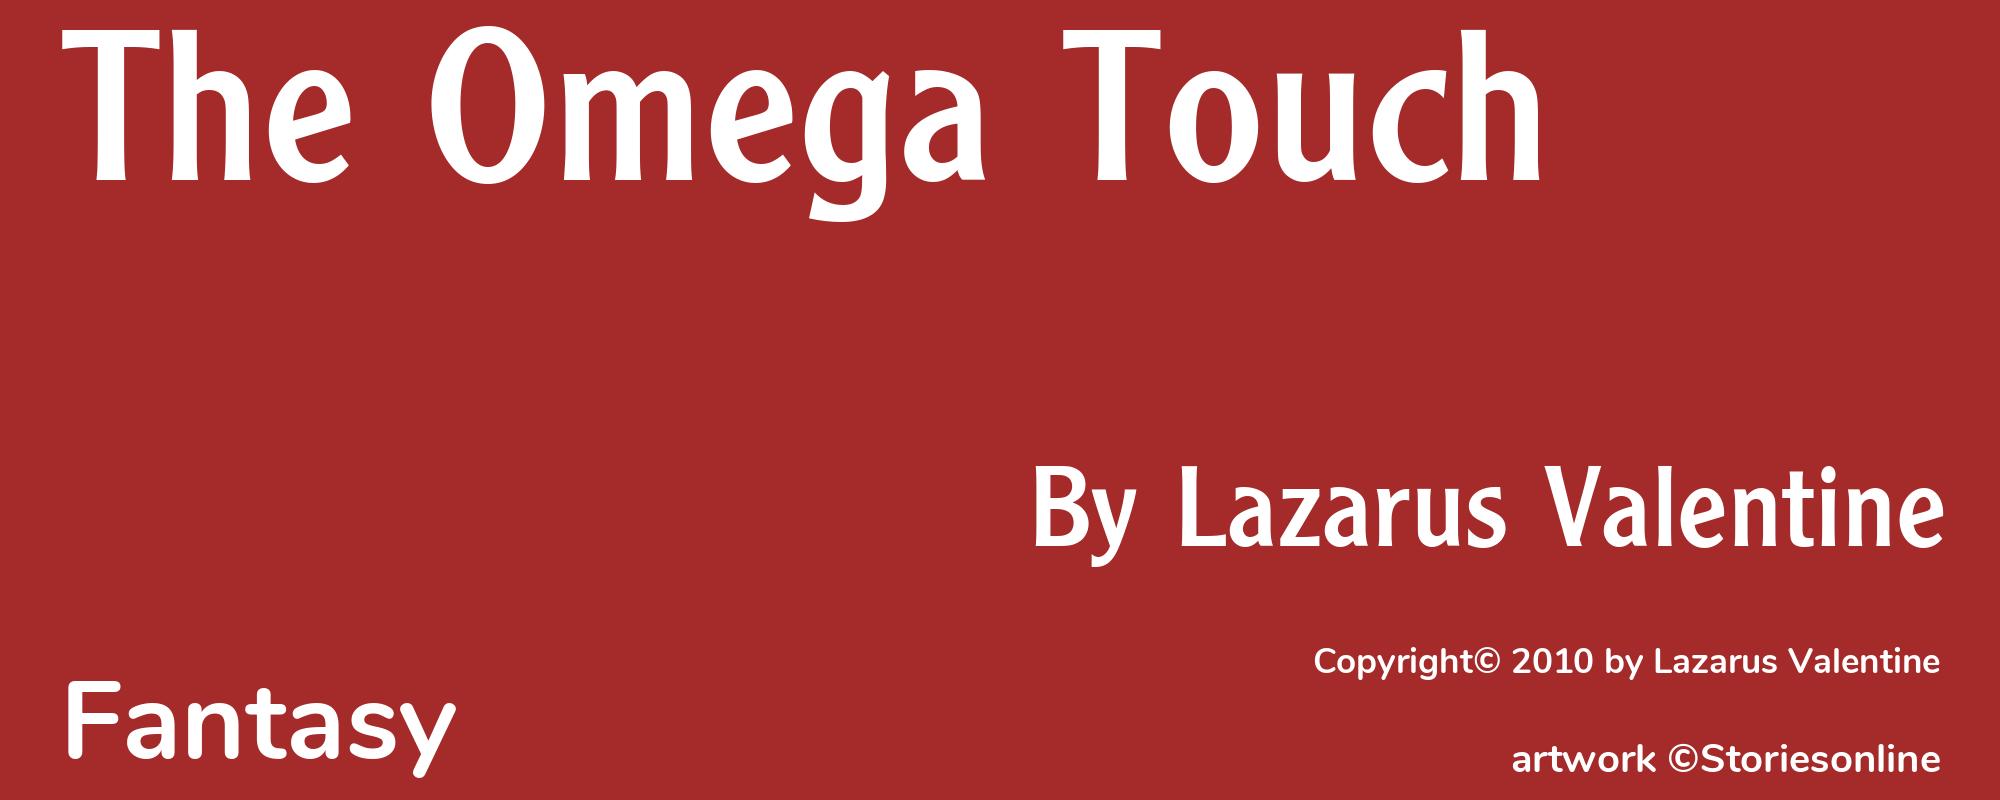 The Omega Touch - Cover